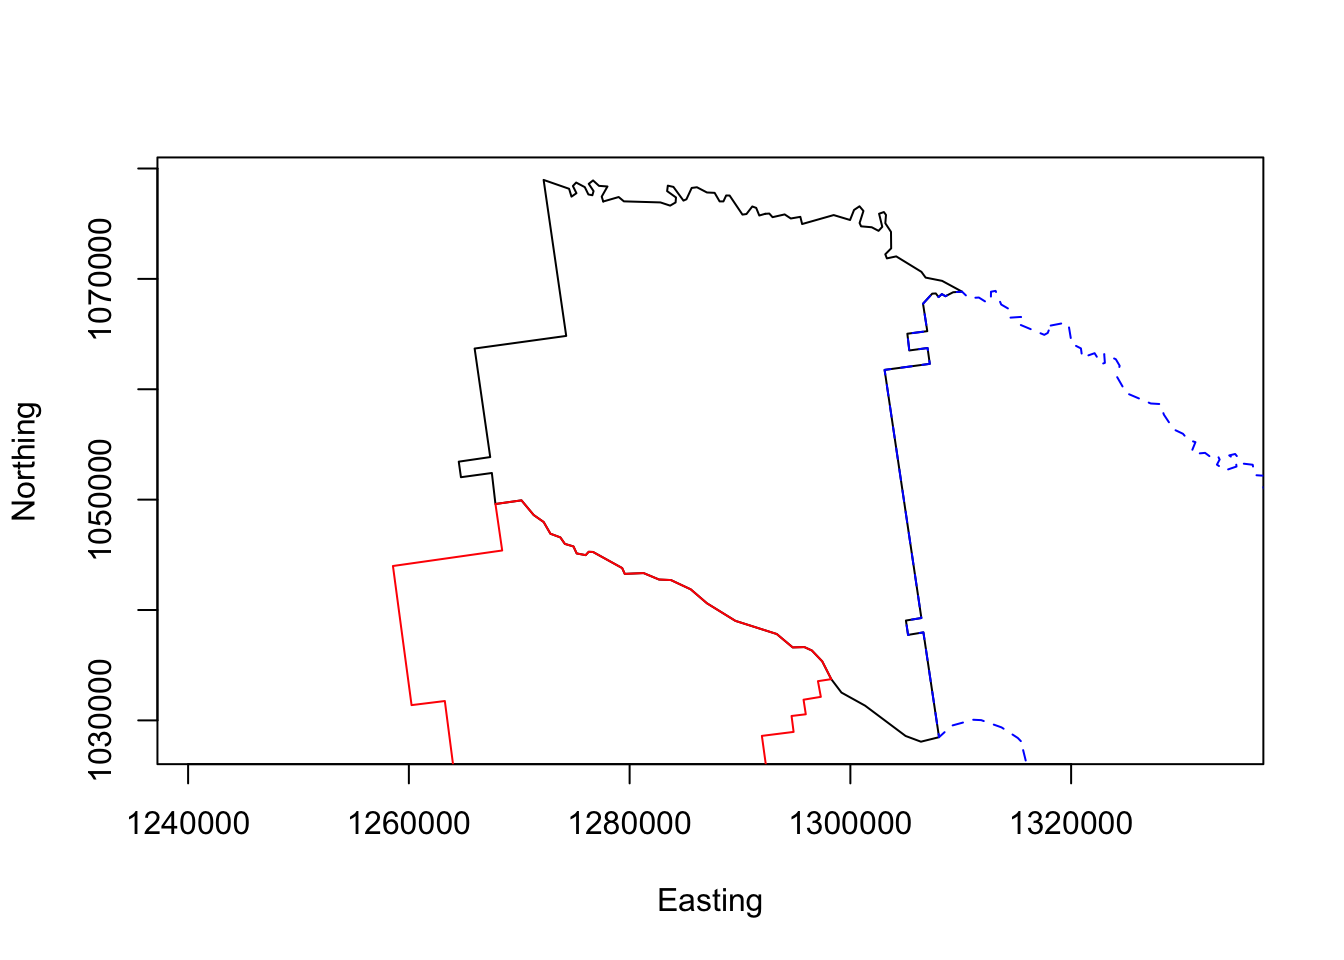 A simple plot of Appling County and 2 adjacent counties.